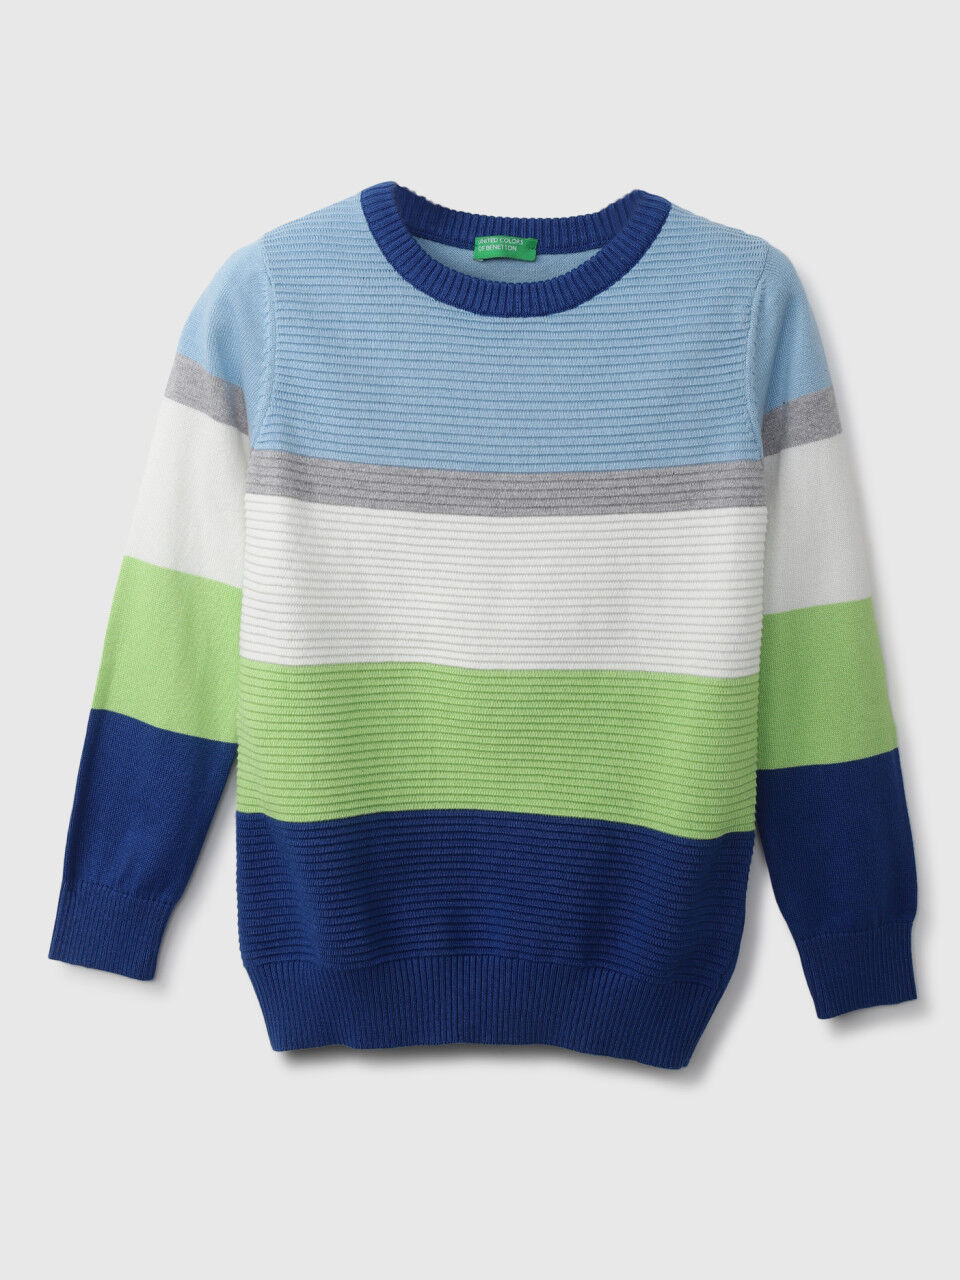 United Colors of Benetton Boys Striped Sweater